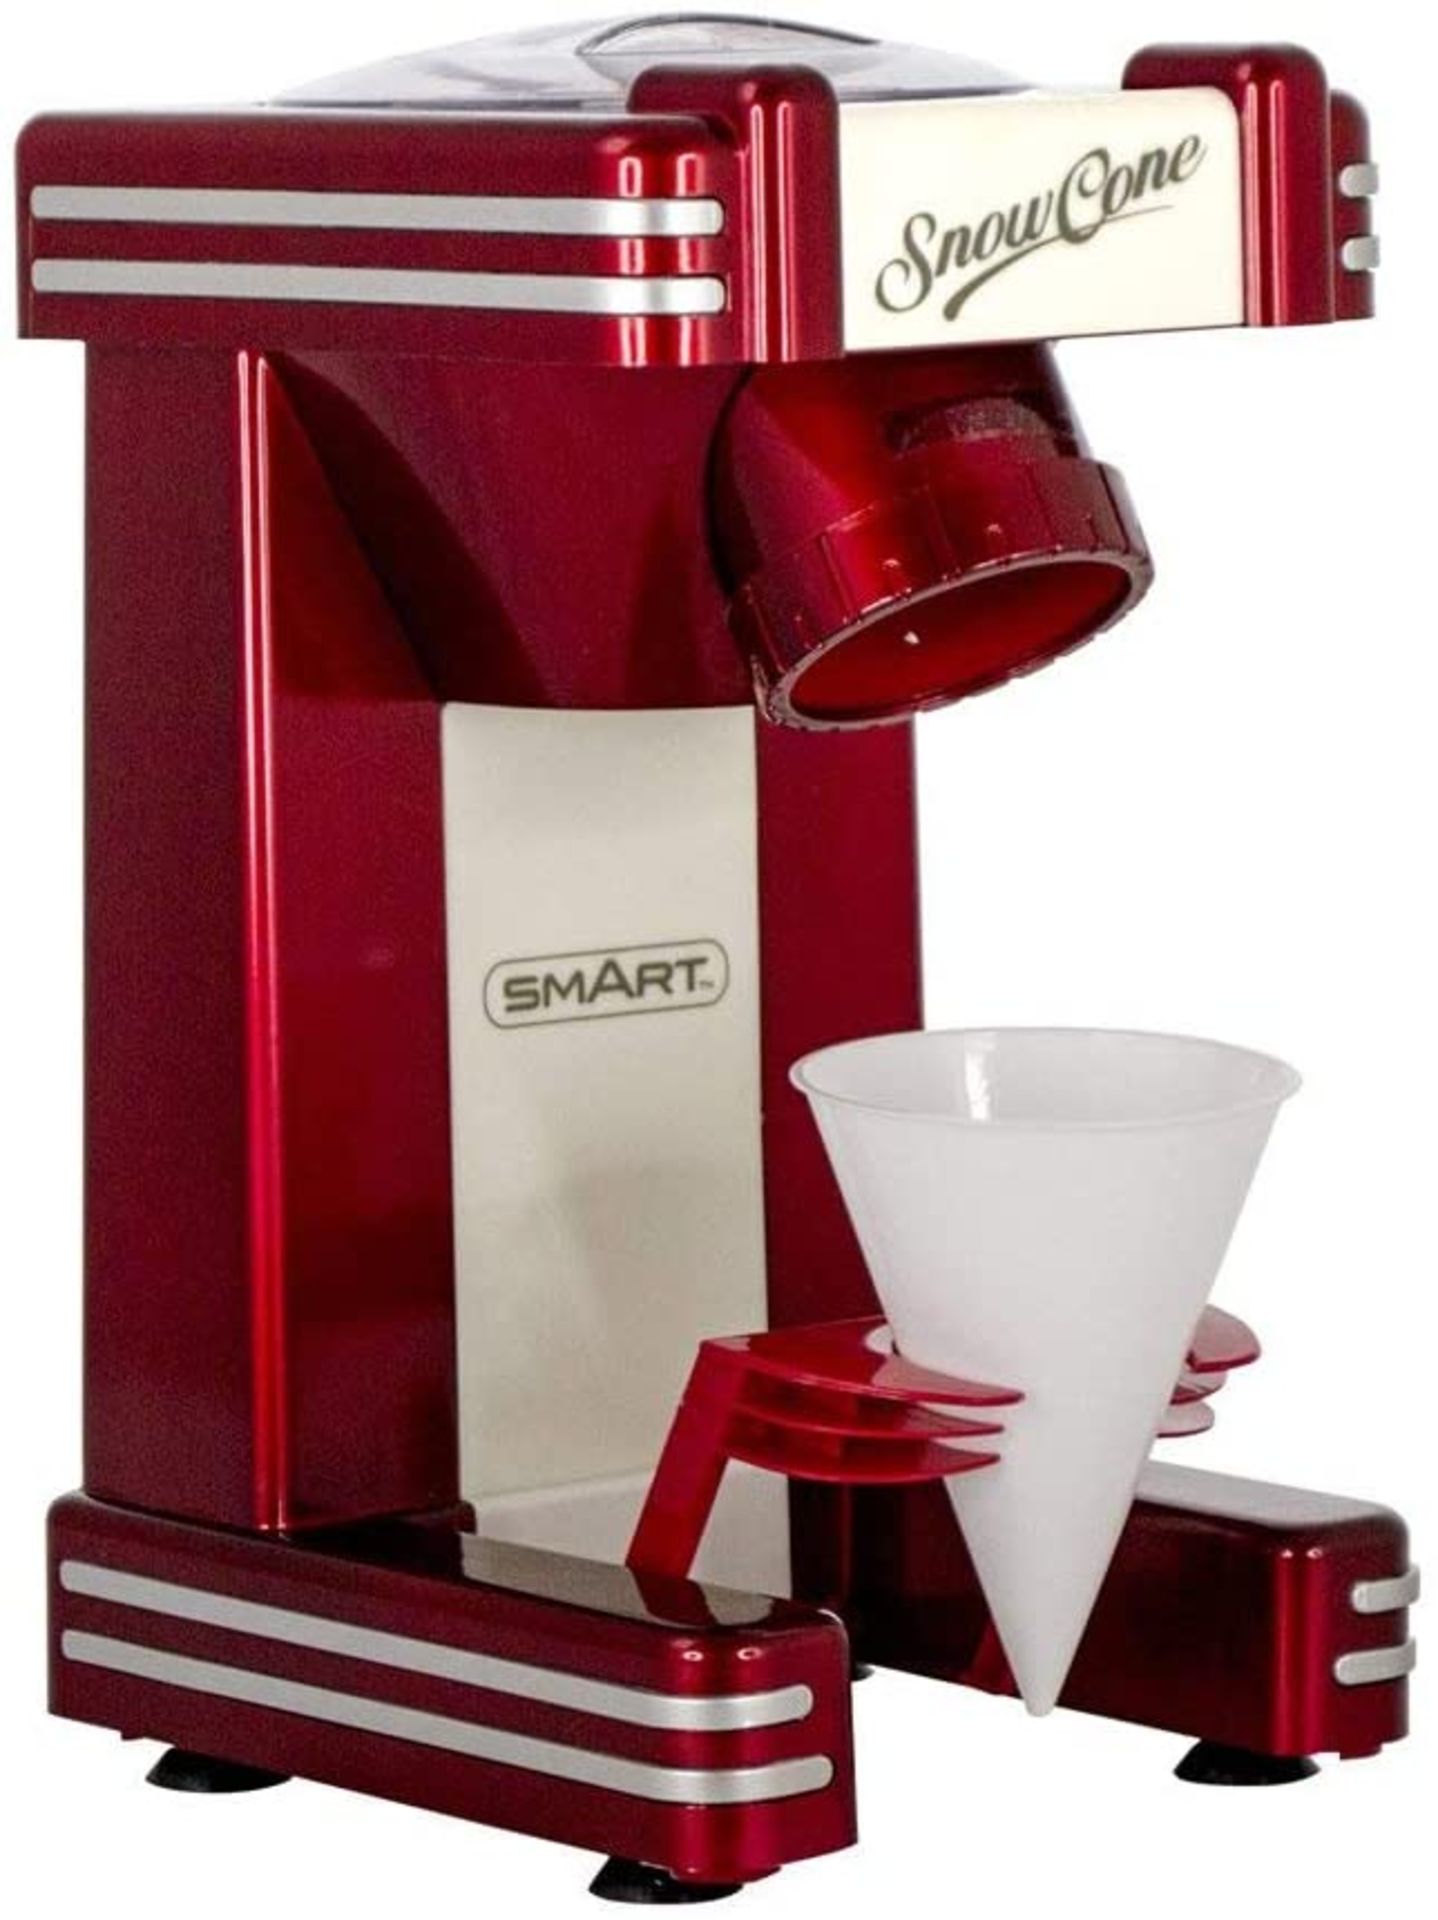 (R8) Lot RRP £177. 3x SMART Snow Cone Maker RRP £59 Each. (Units Have Return To Manufacturer Sticke - Image 2 of 3